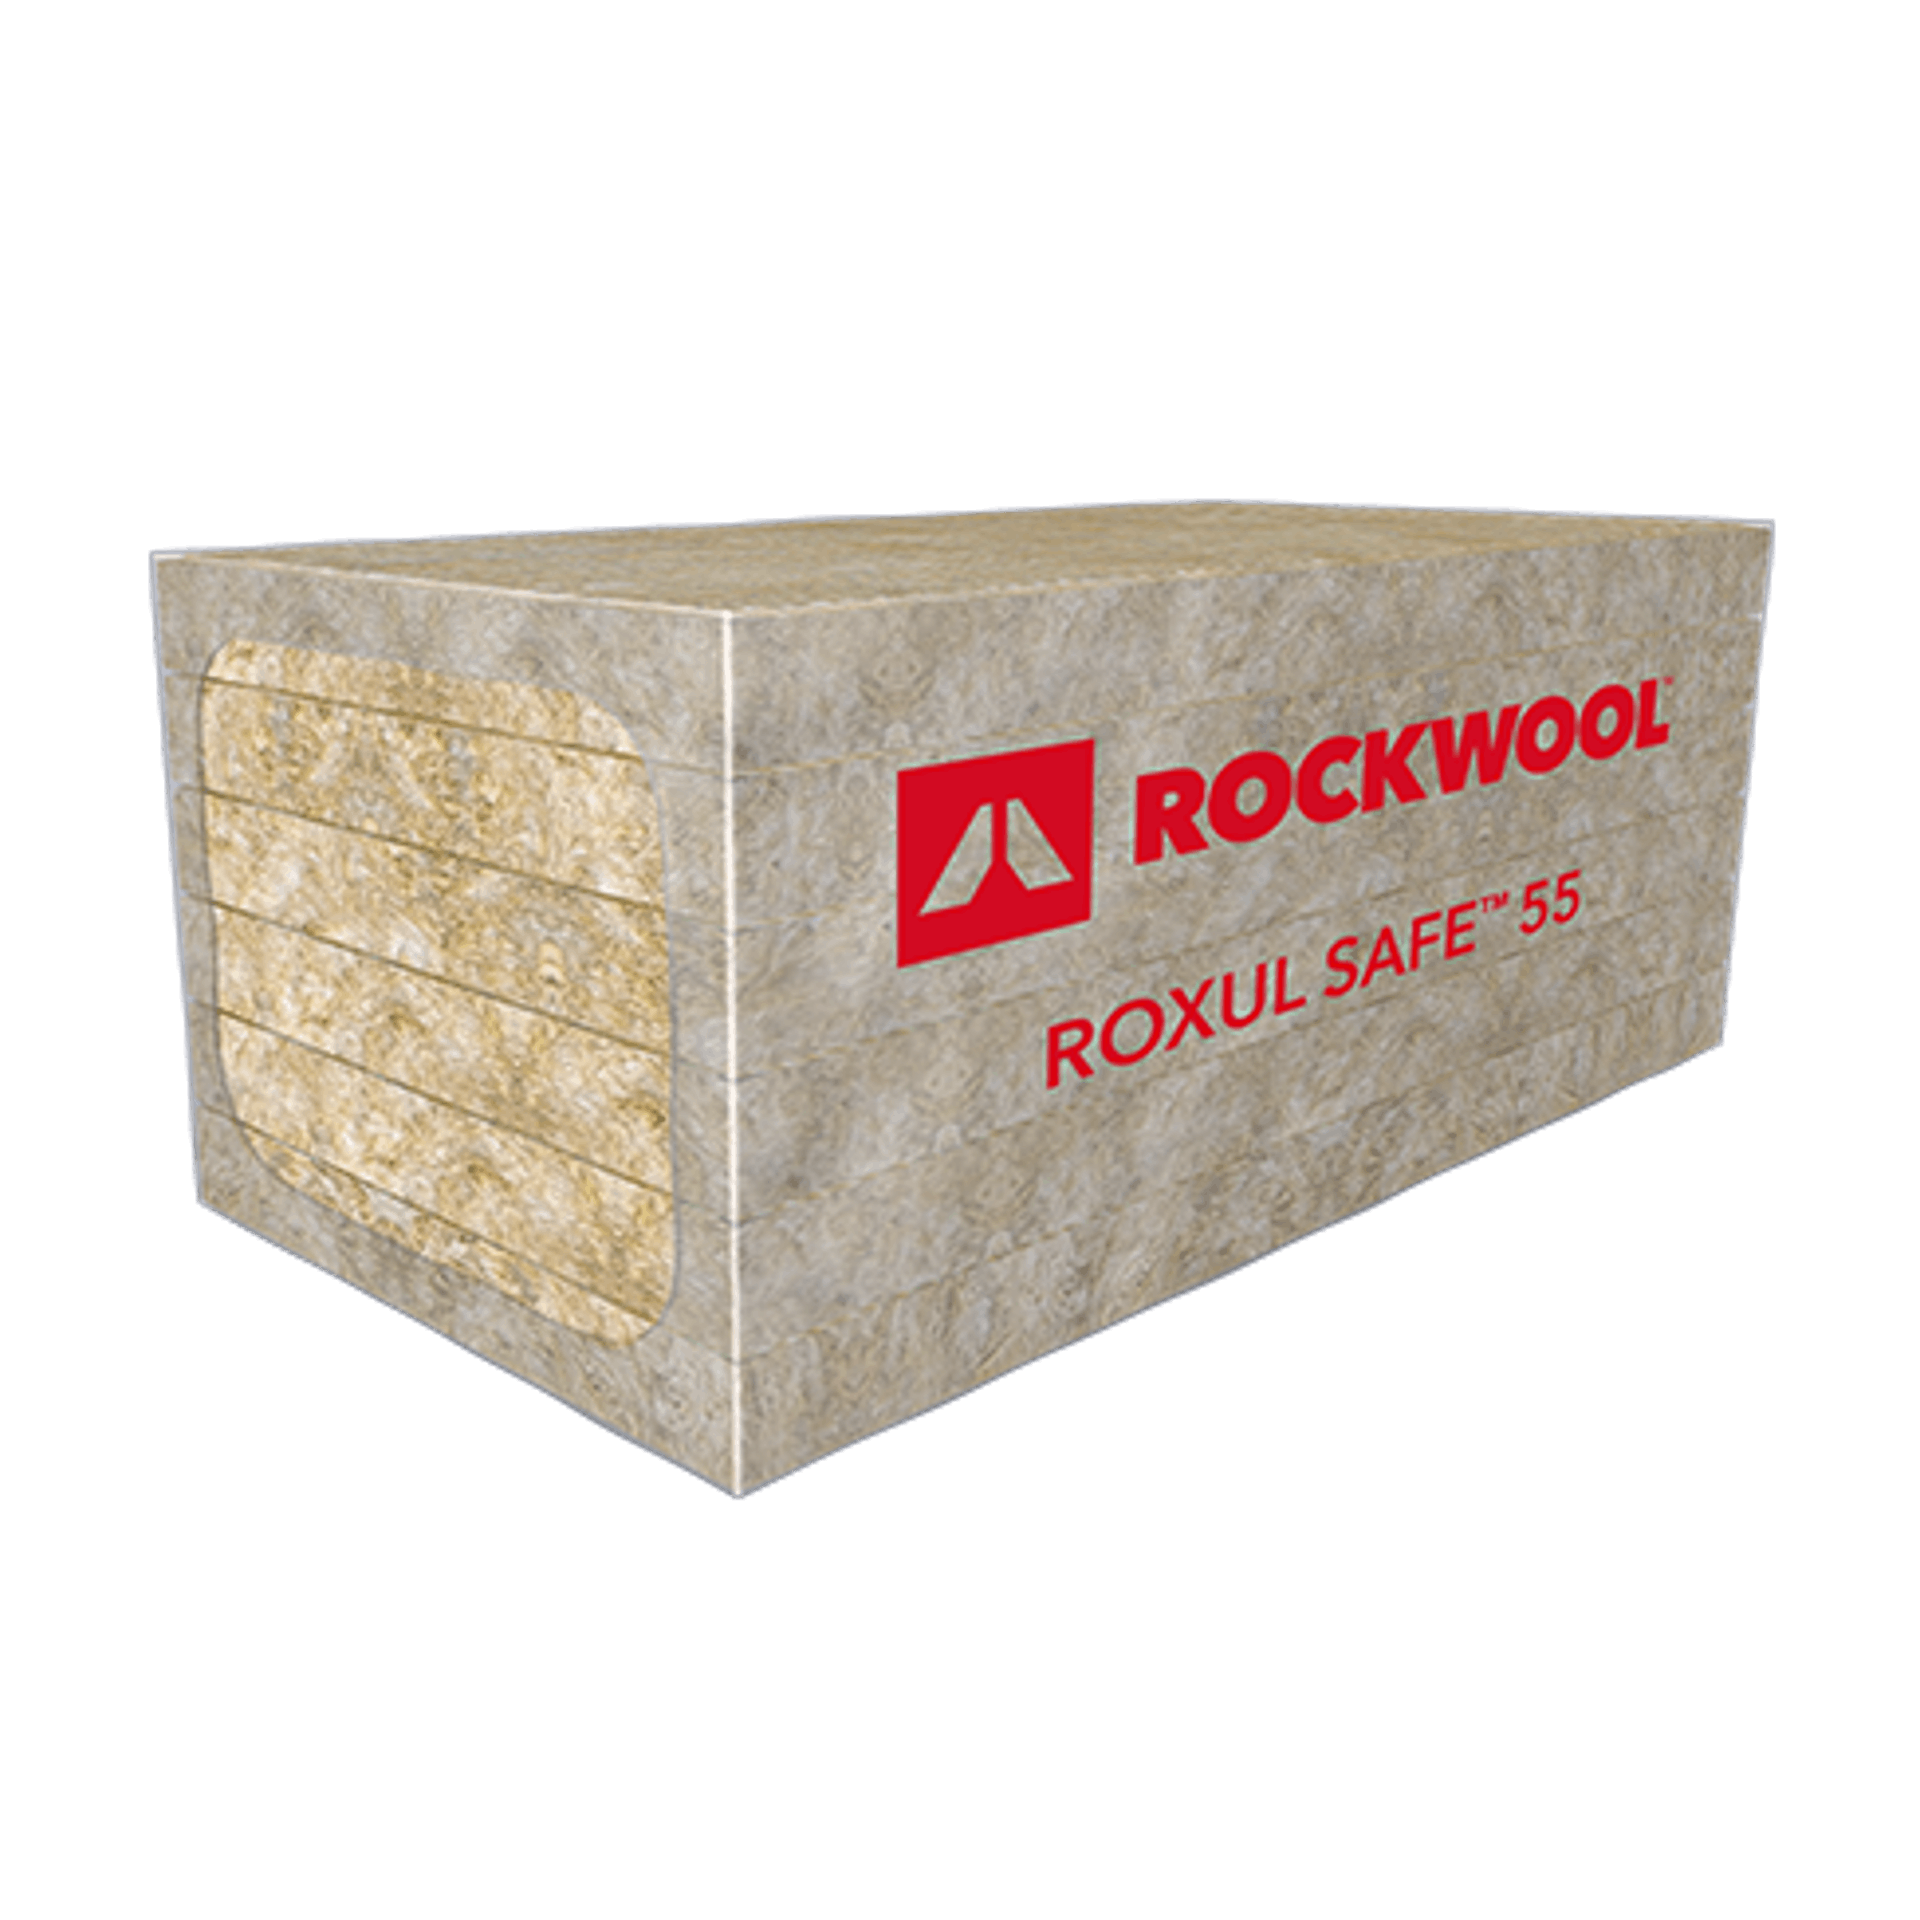 ROXUL SAFE™ 55 & 65 medium-density insulation products for interior and exterior firewall